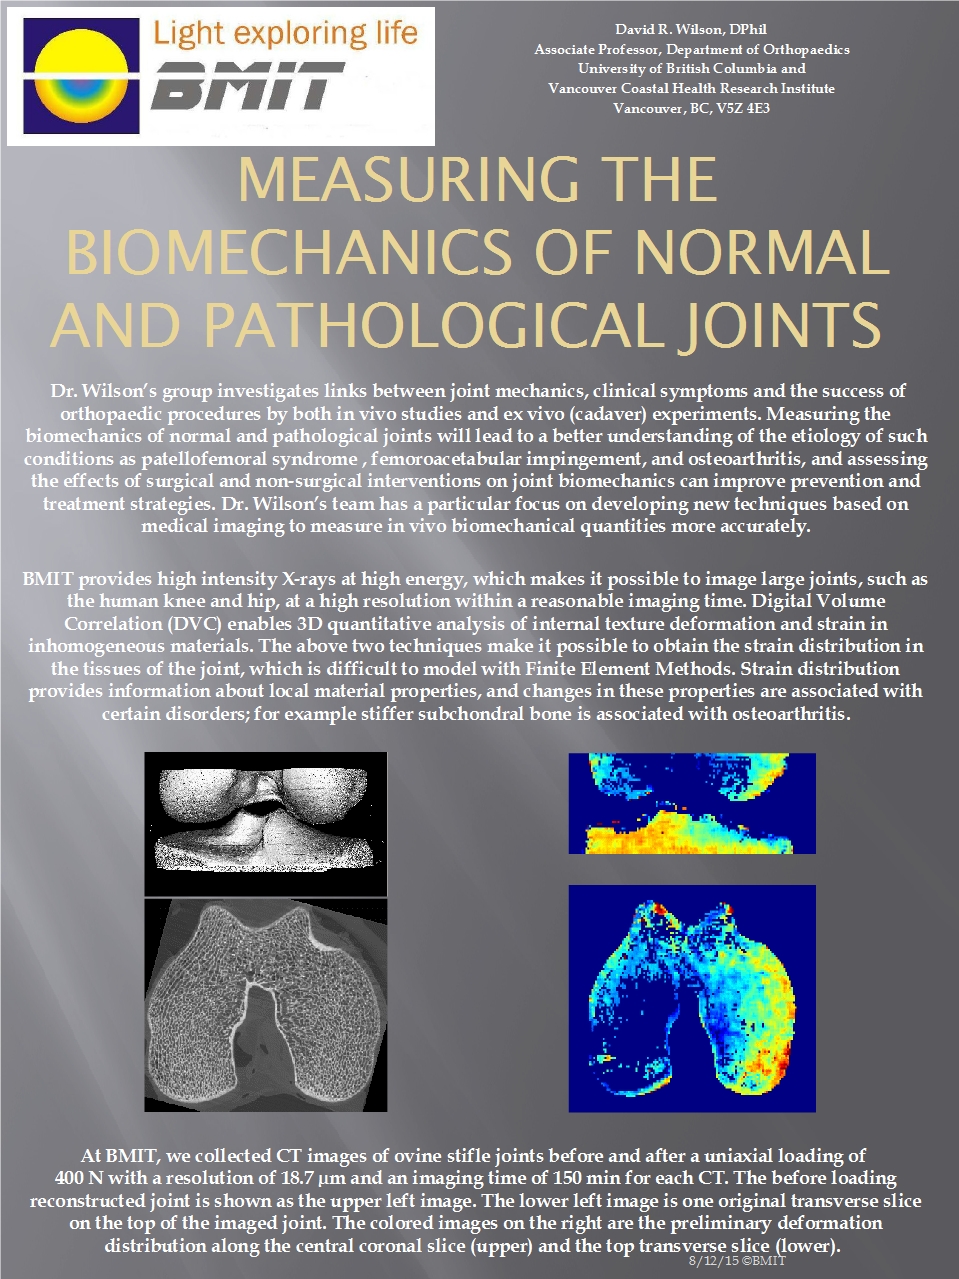 Measuring the Biomechanics of Normal and Pathological Joints Image